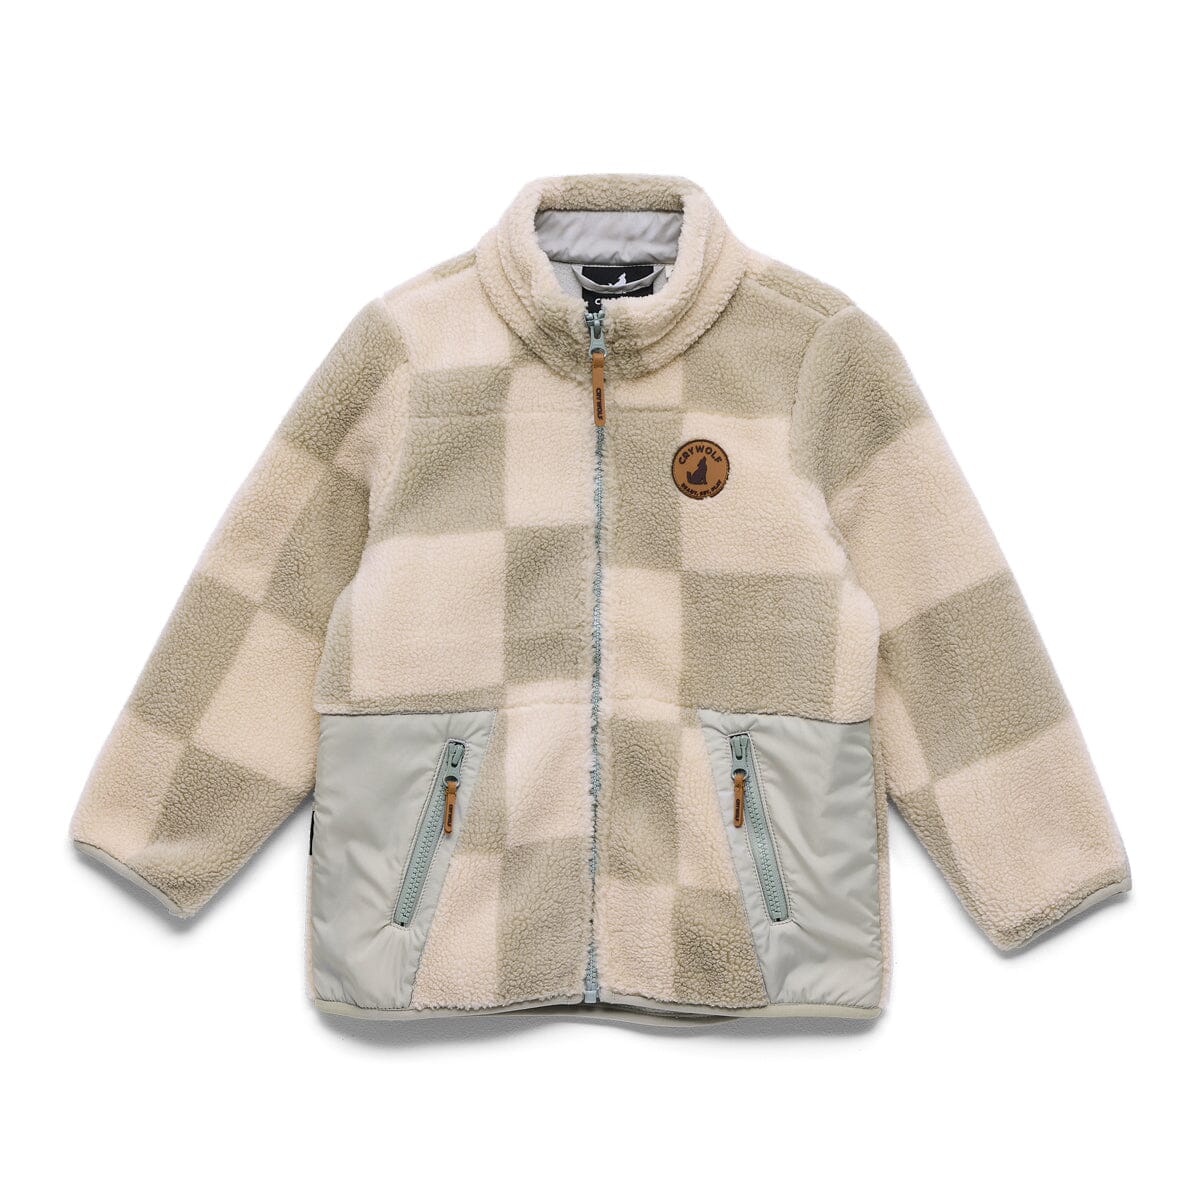 Crywolf | YETI JACKET - Moss Checkered *** PRE ORDER / DUE EARLY-MID APRIL *** Boys Crywolf